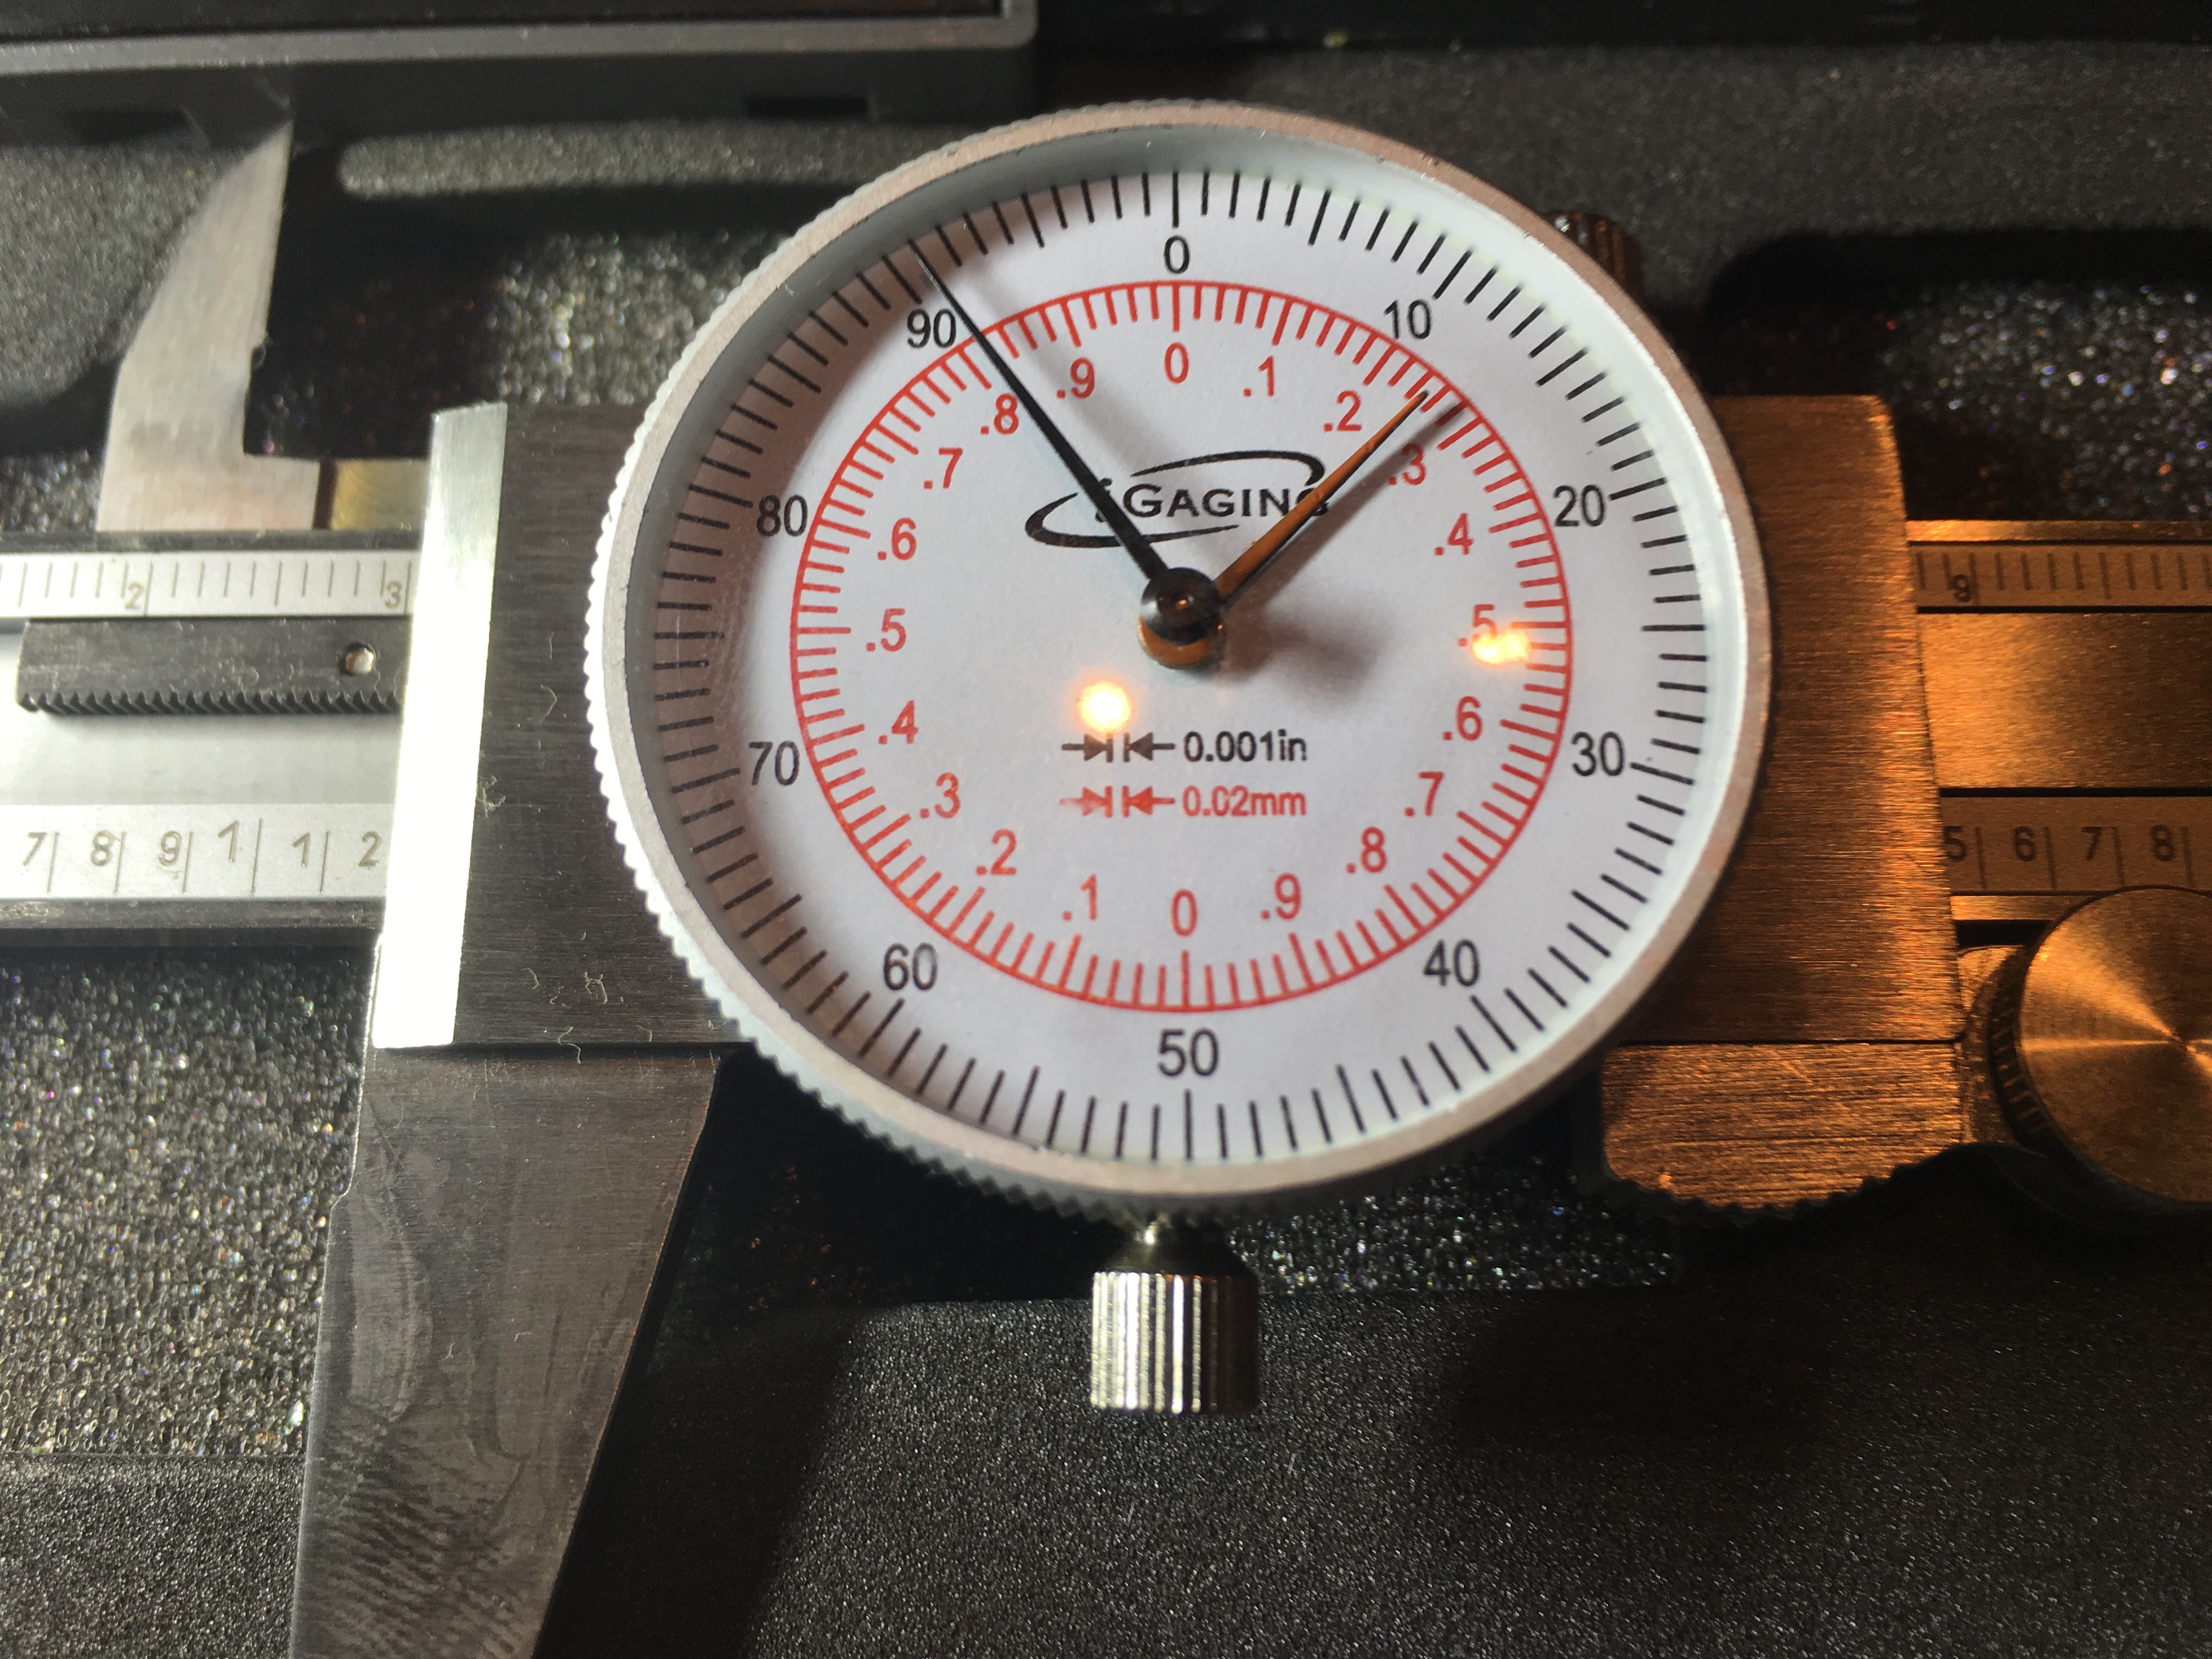  iGaging Dial Caliper 6" 150mm Dual Scale Metric in mm with Depth Base T-Bar